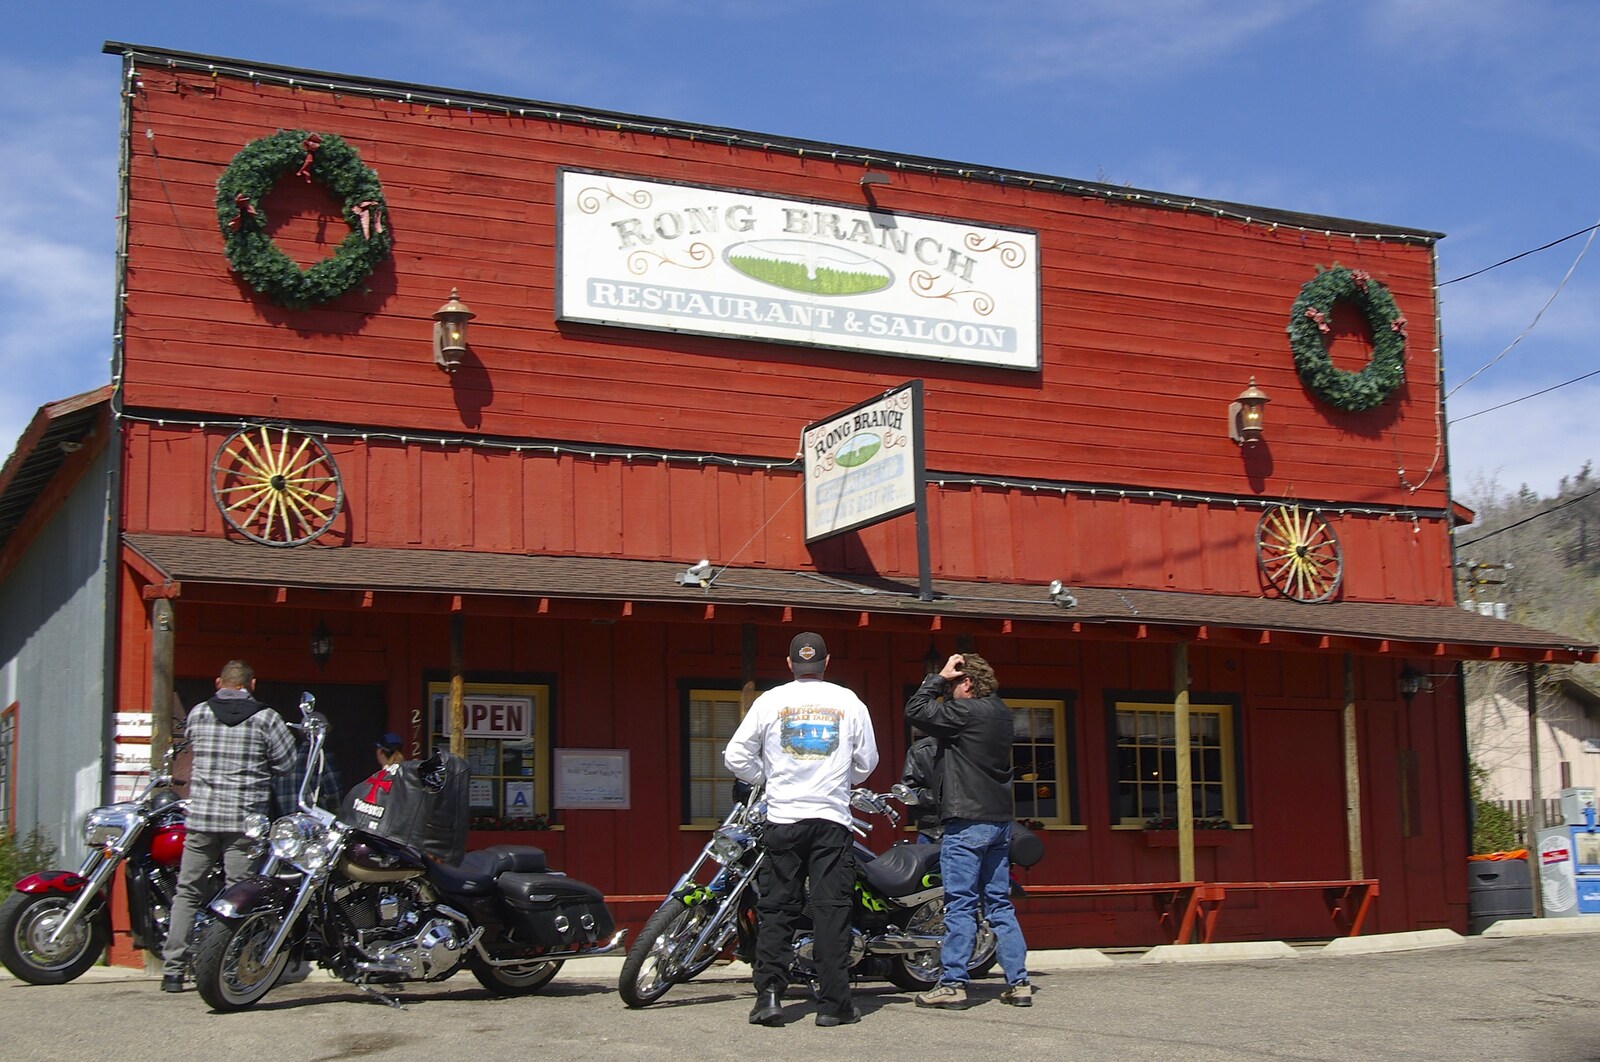 The 'Rong Branch' saloon, and a bunch of bikers from San Diego 8: The Beaches of Torrey Pines, and Ramona, California, USA - 29th February 2008